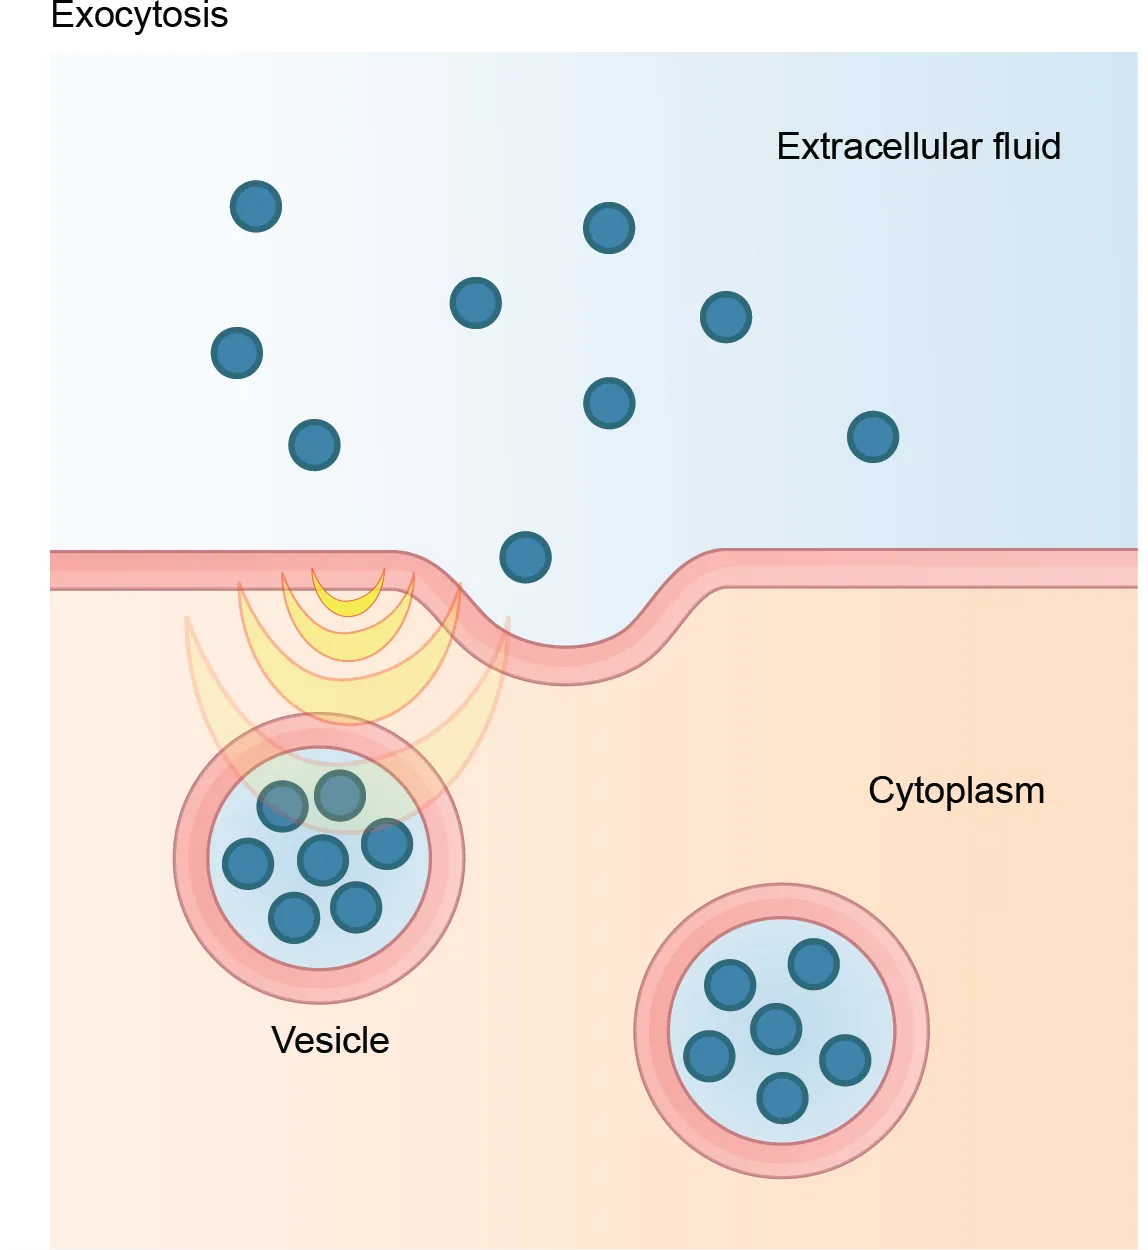 This illustration shows vesicles fusing with the plasma membrane and releasing their contents to the extracellular fluid.